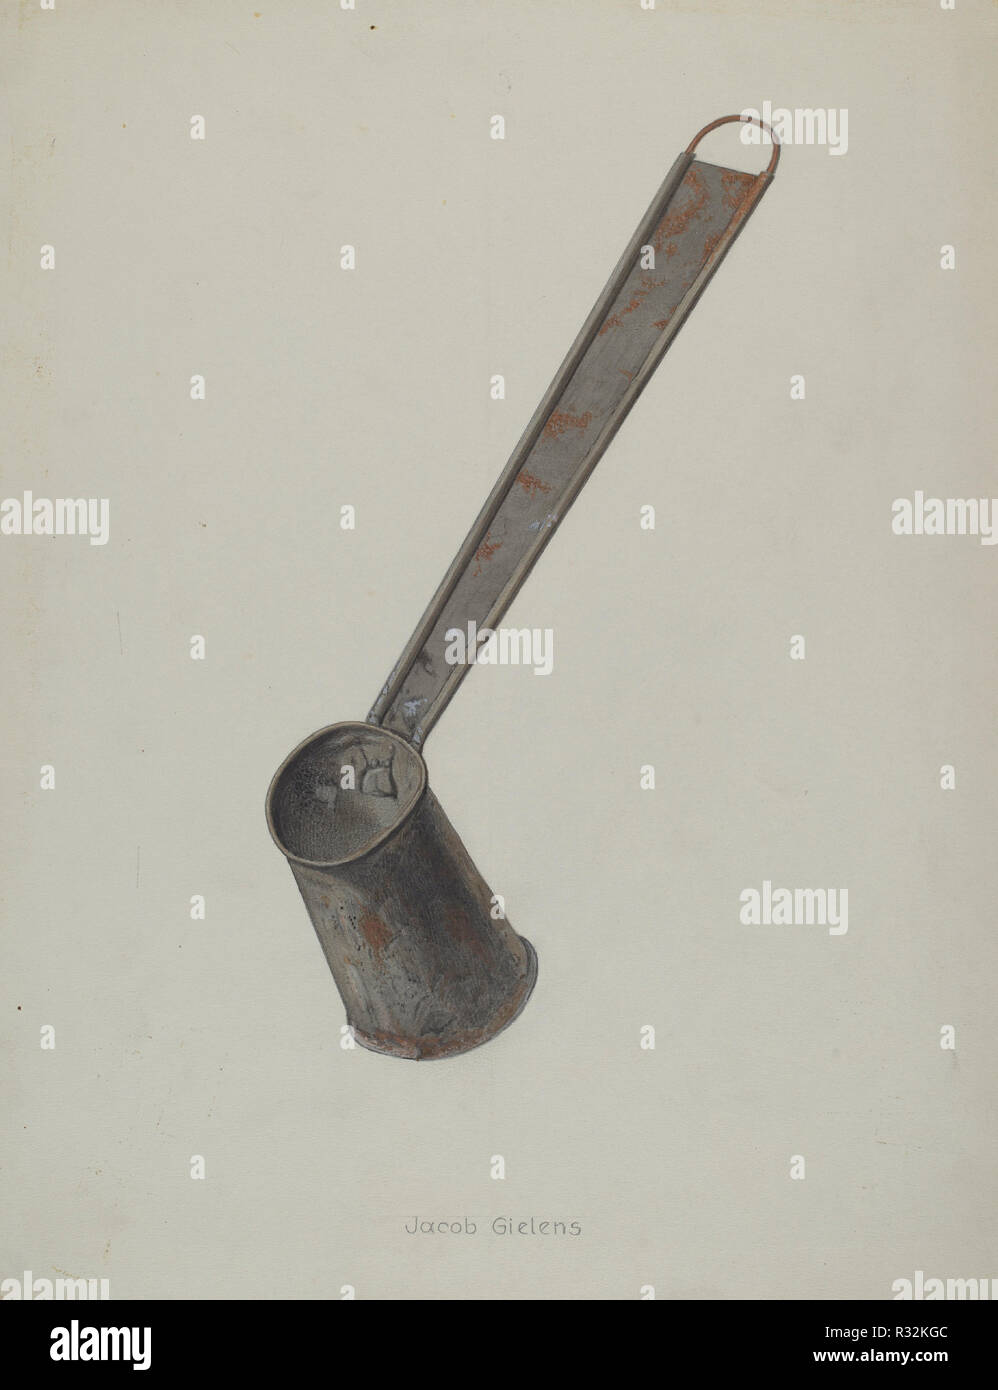 Dipper. Dated: c. 1938. Dimensions: overall: 36 x 28 cm (14 3/16 x 11 in.). Medium: watercolor, graphite, colored pencil, and heightening on paperboard. Museum: National Gallery of Art, Washington DC. Author: Jacob Gielens. Stock Photo